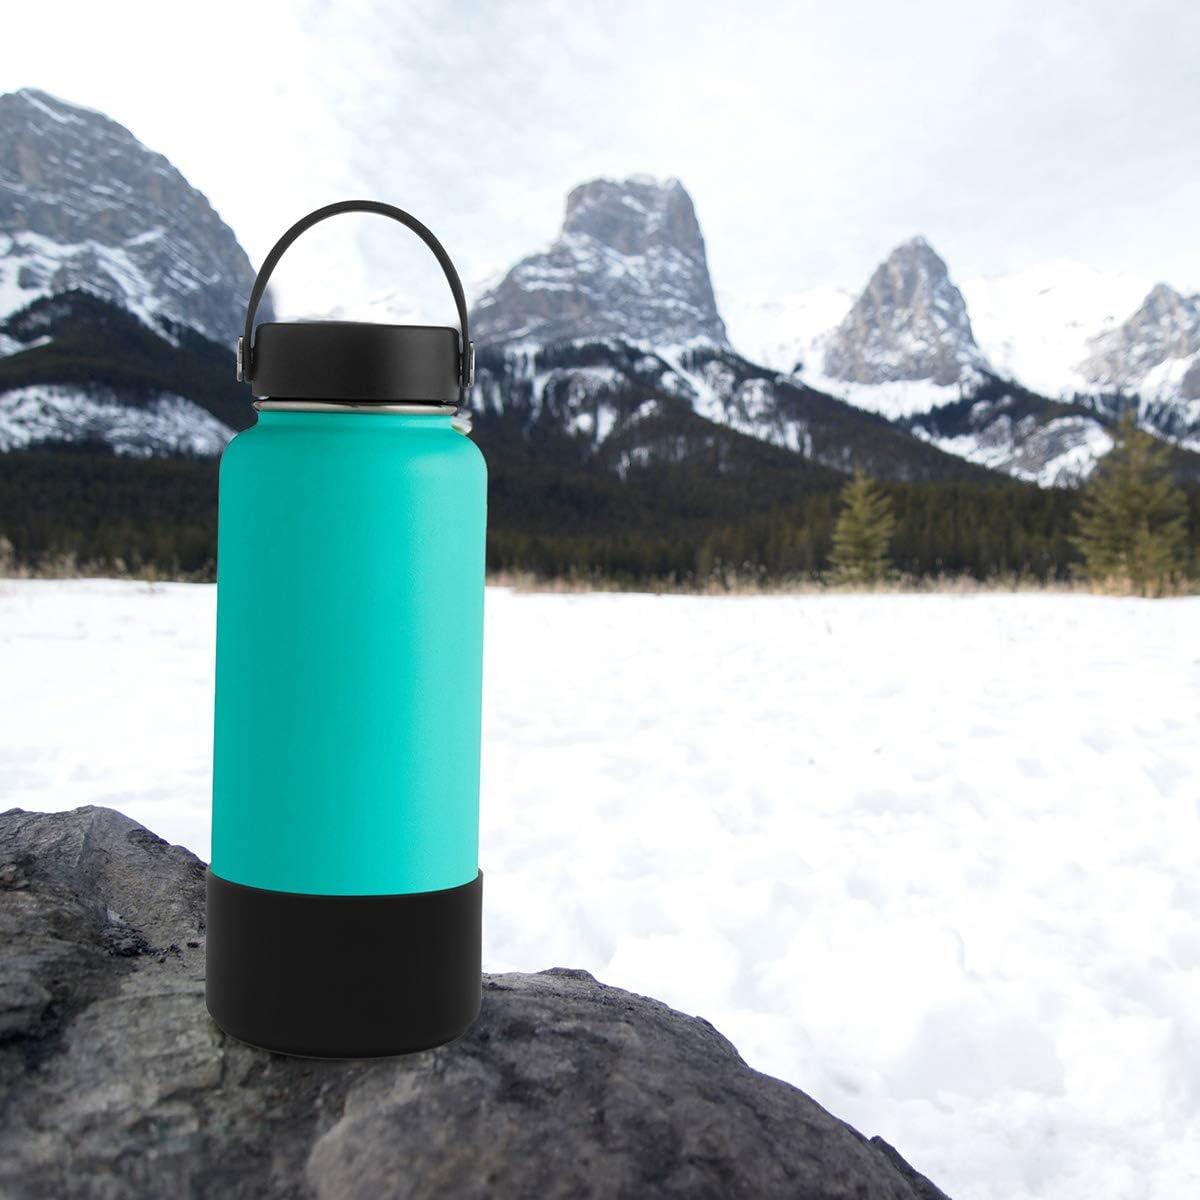 They're called “Flaskars Protective Silicone Boot for 12oz - 40 oz Hyd, hydro  flask sizes